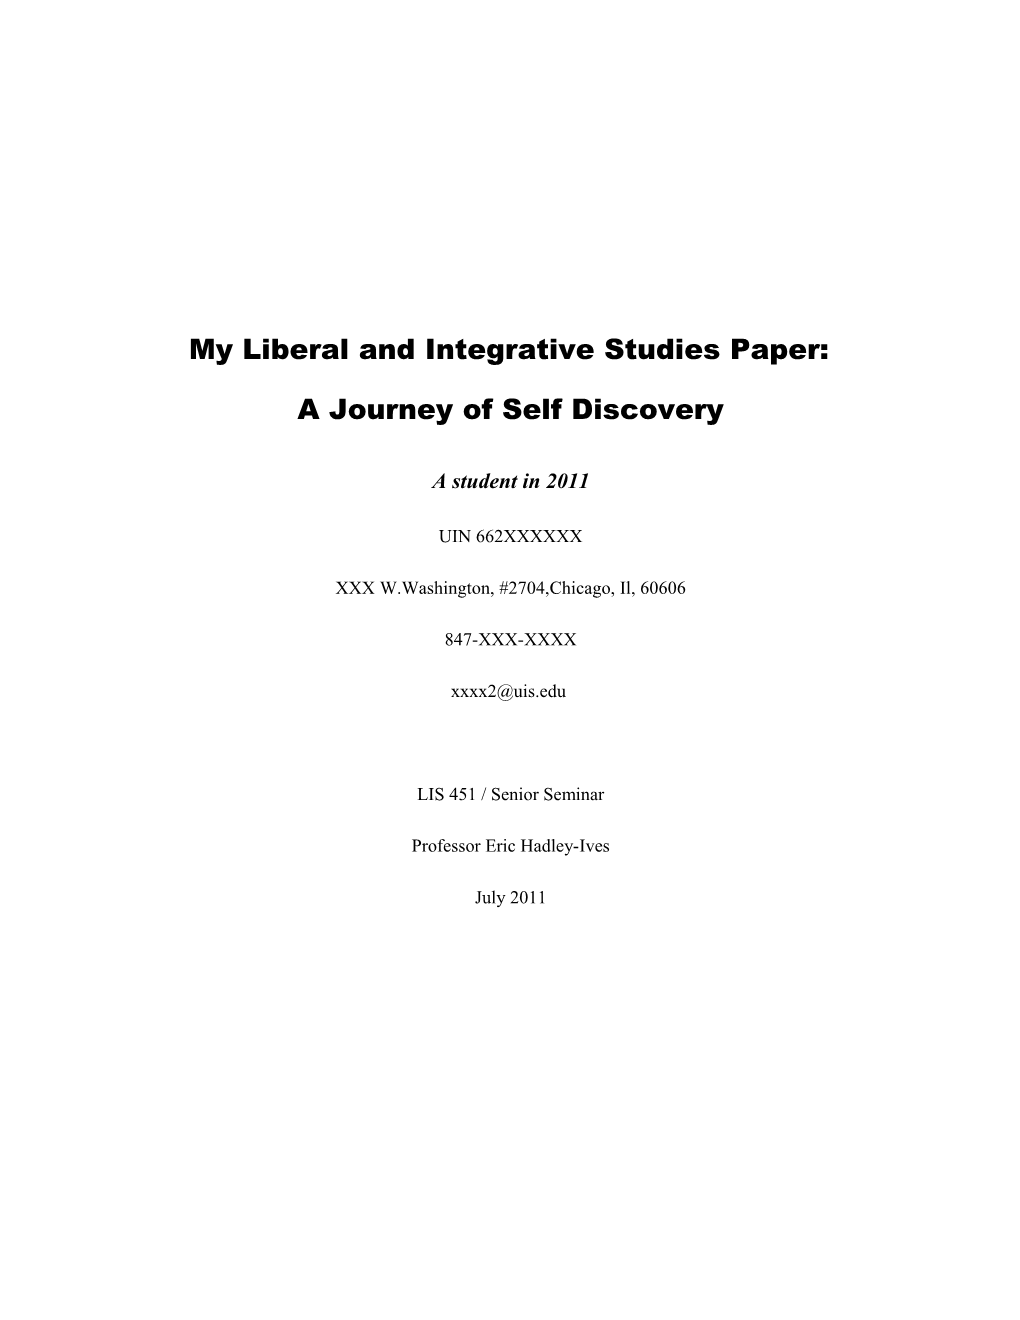 My Liberal and Integrative Studies Paper: a Journey of Self Discovery